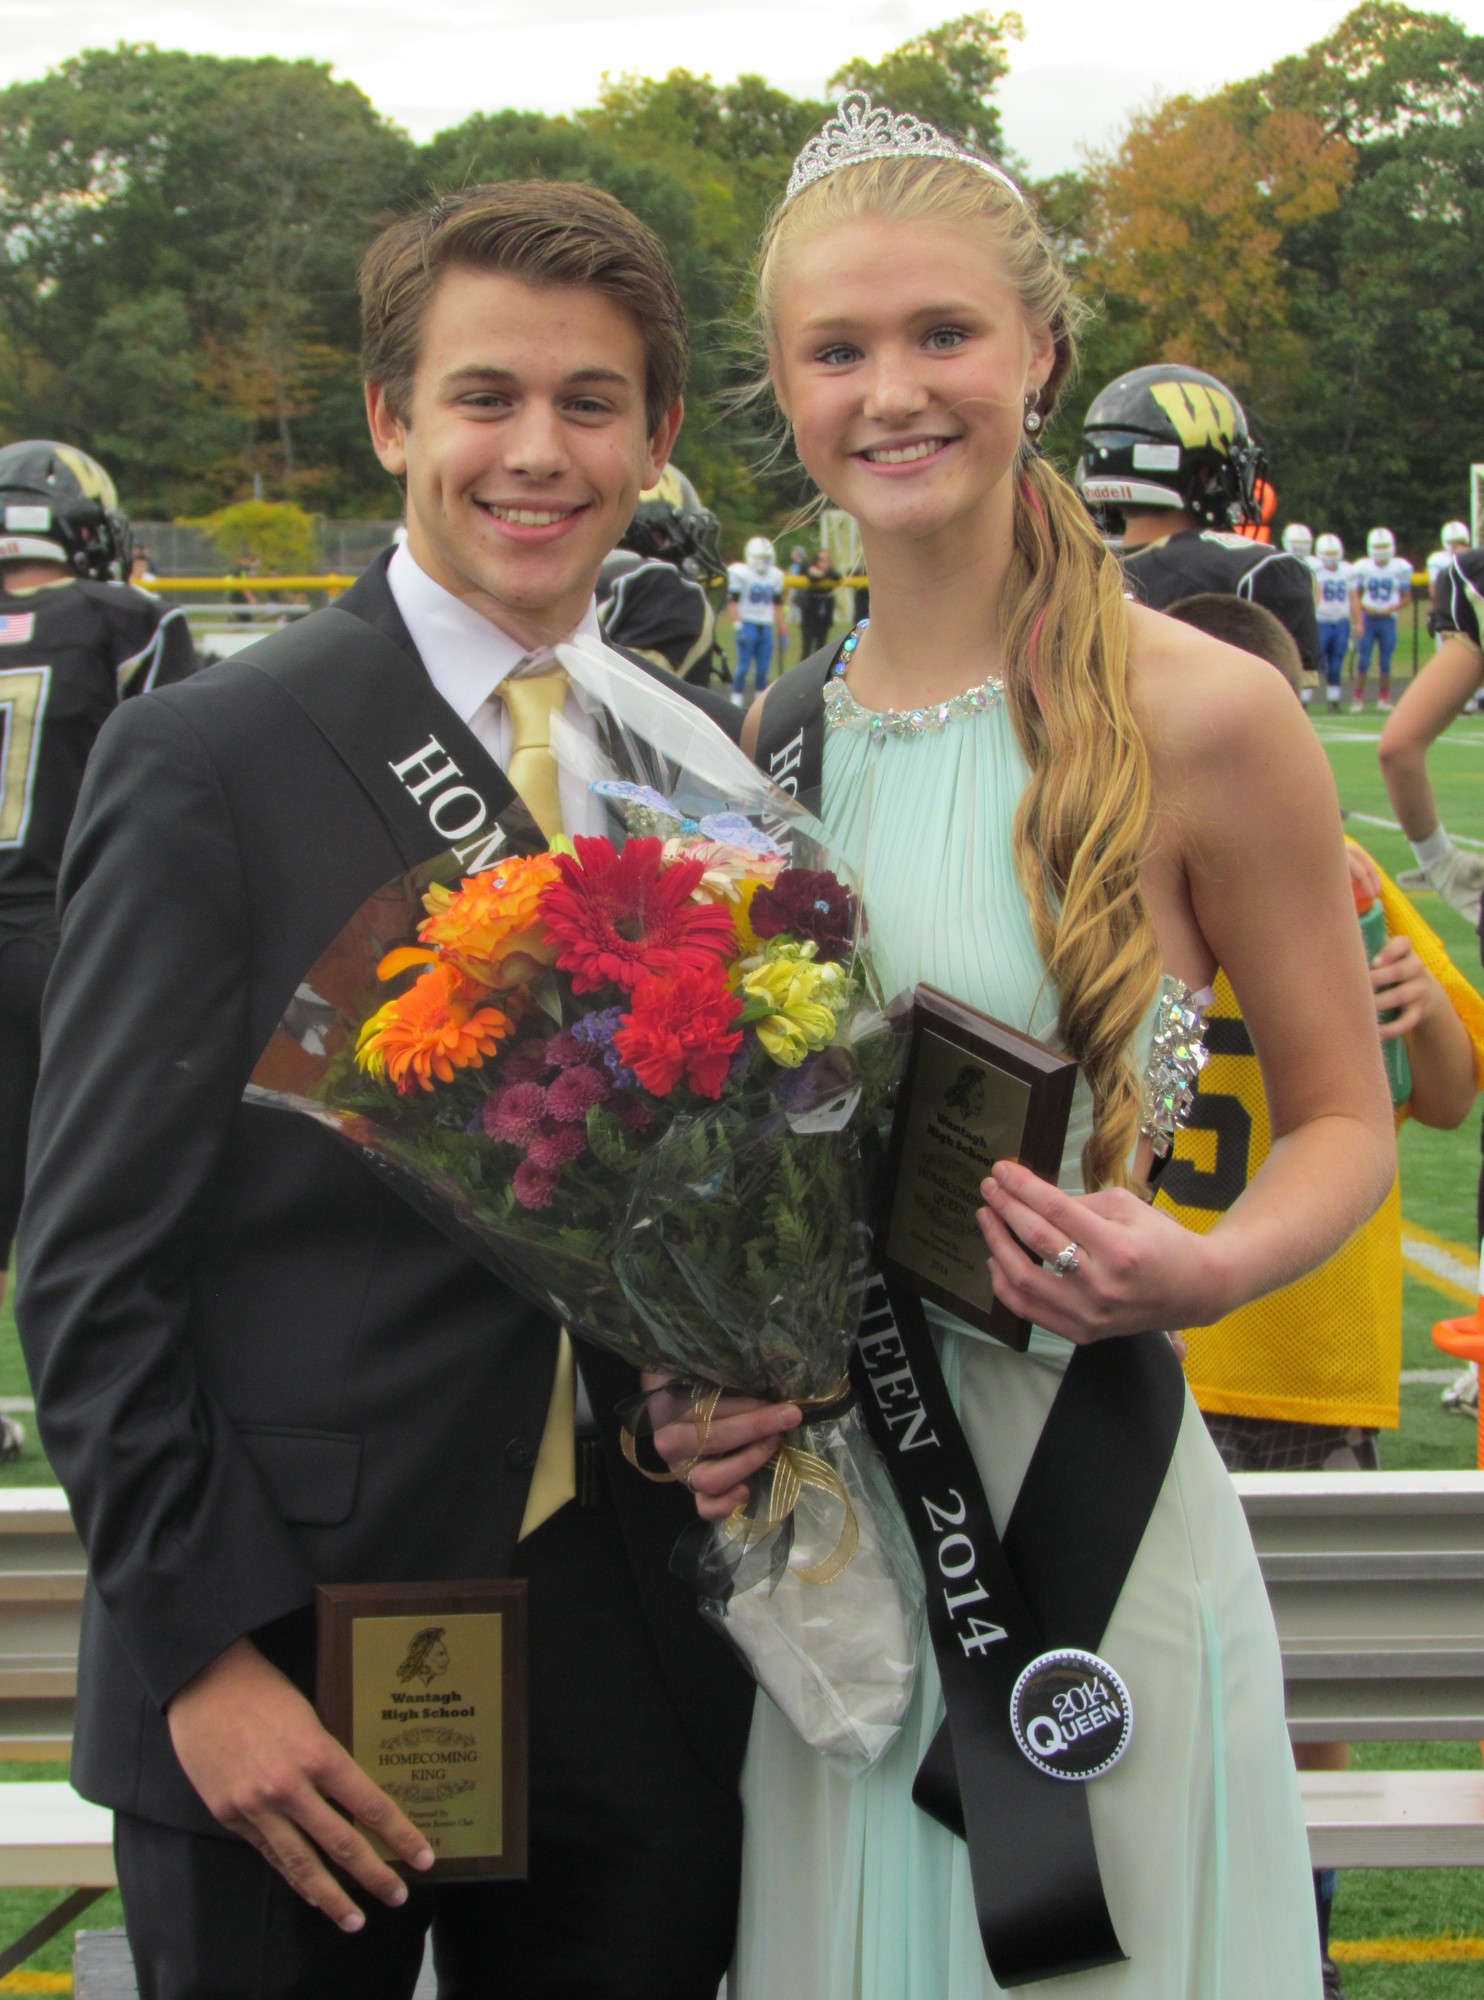 Homecoming Queen Megan Pennino and her king, Anthony Sinacori.